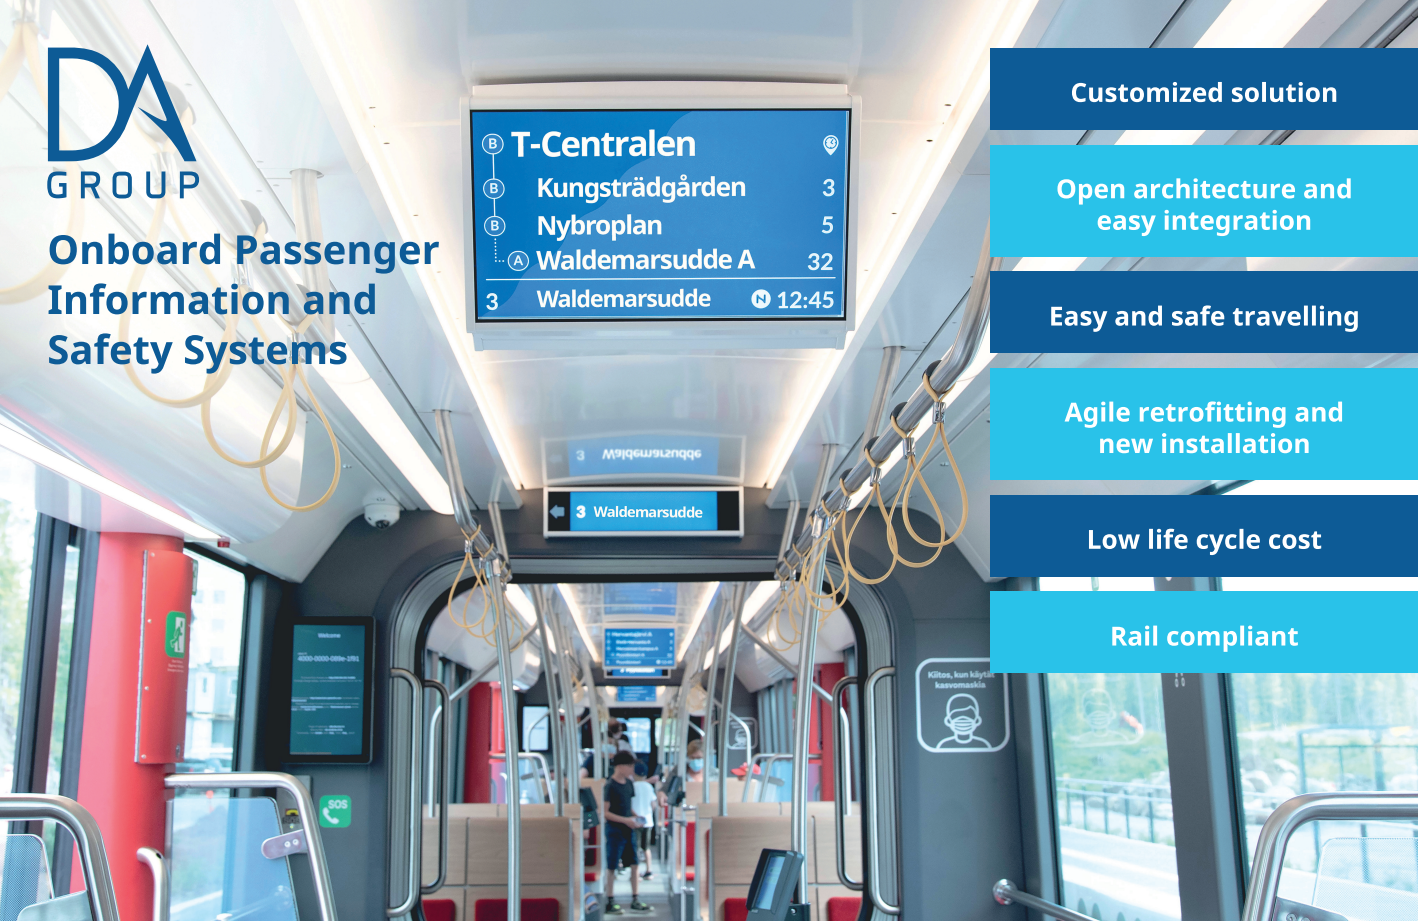 Onboard Passenger Information and Safety Systems